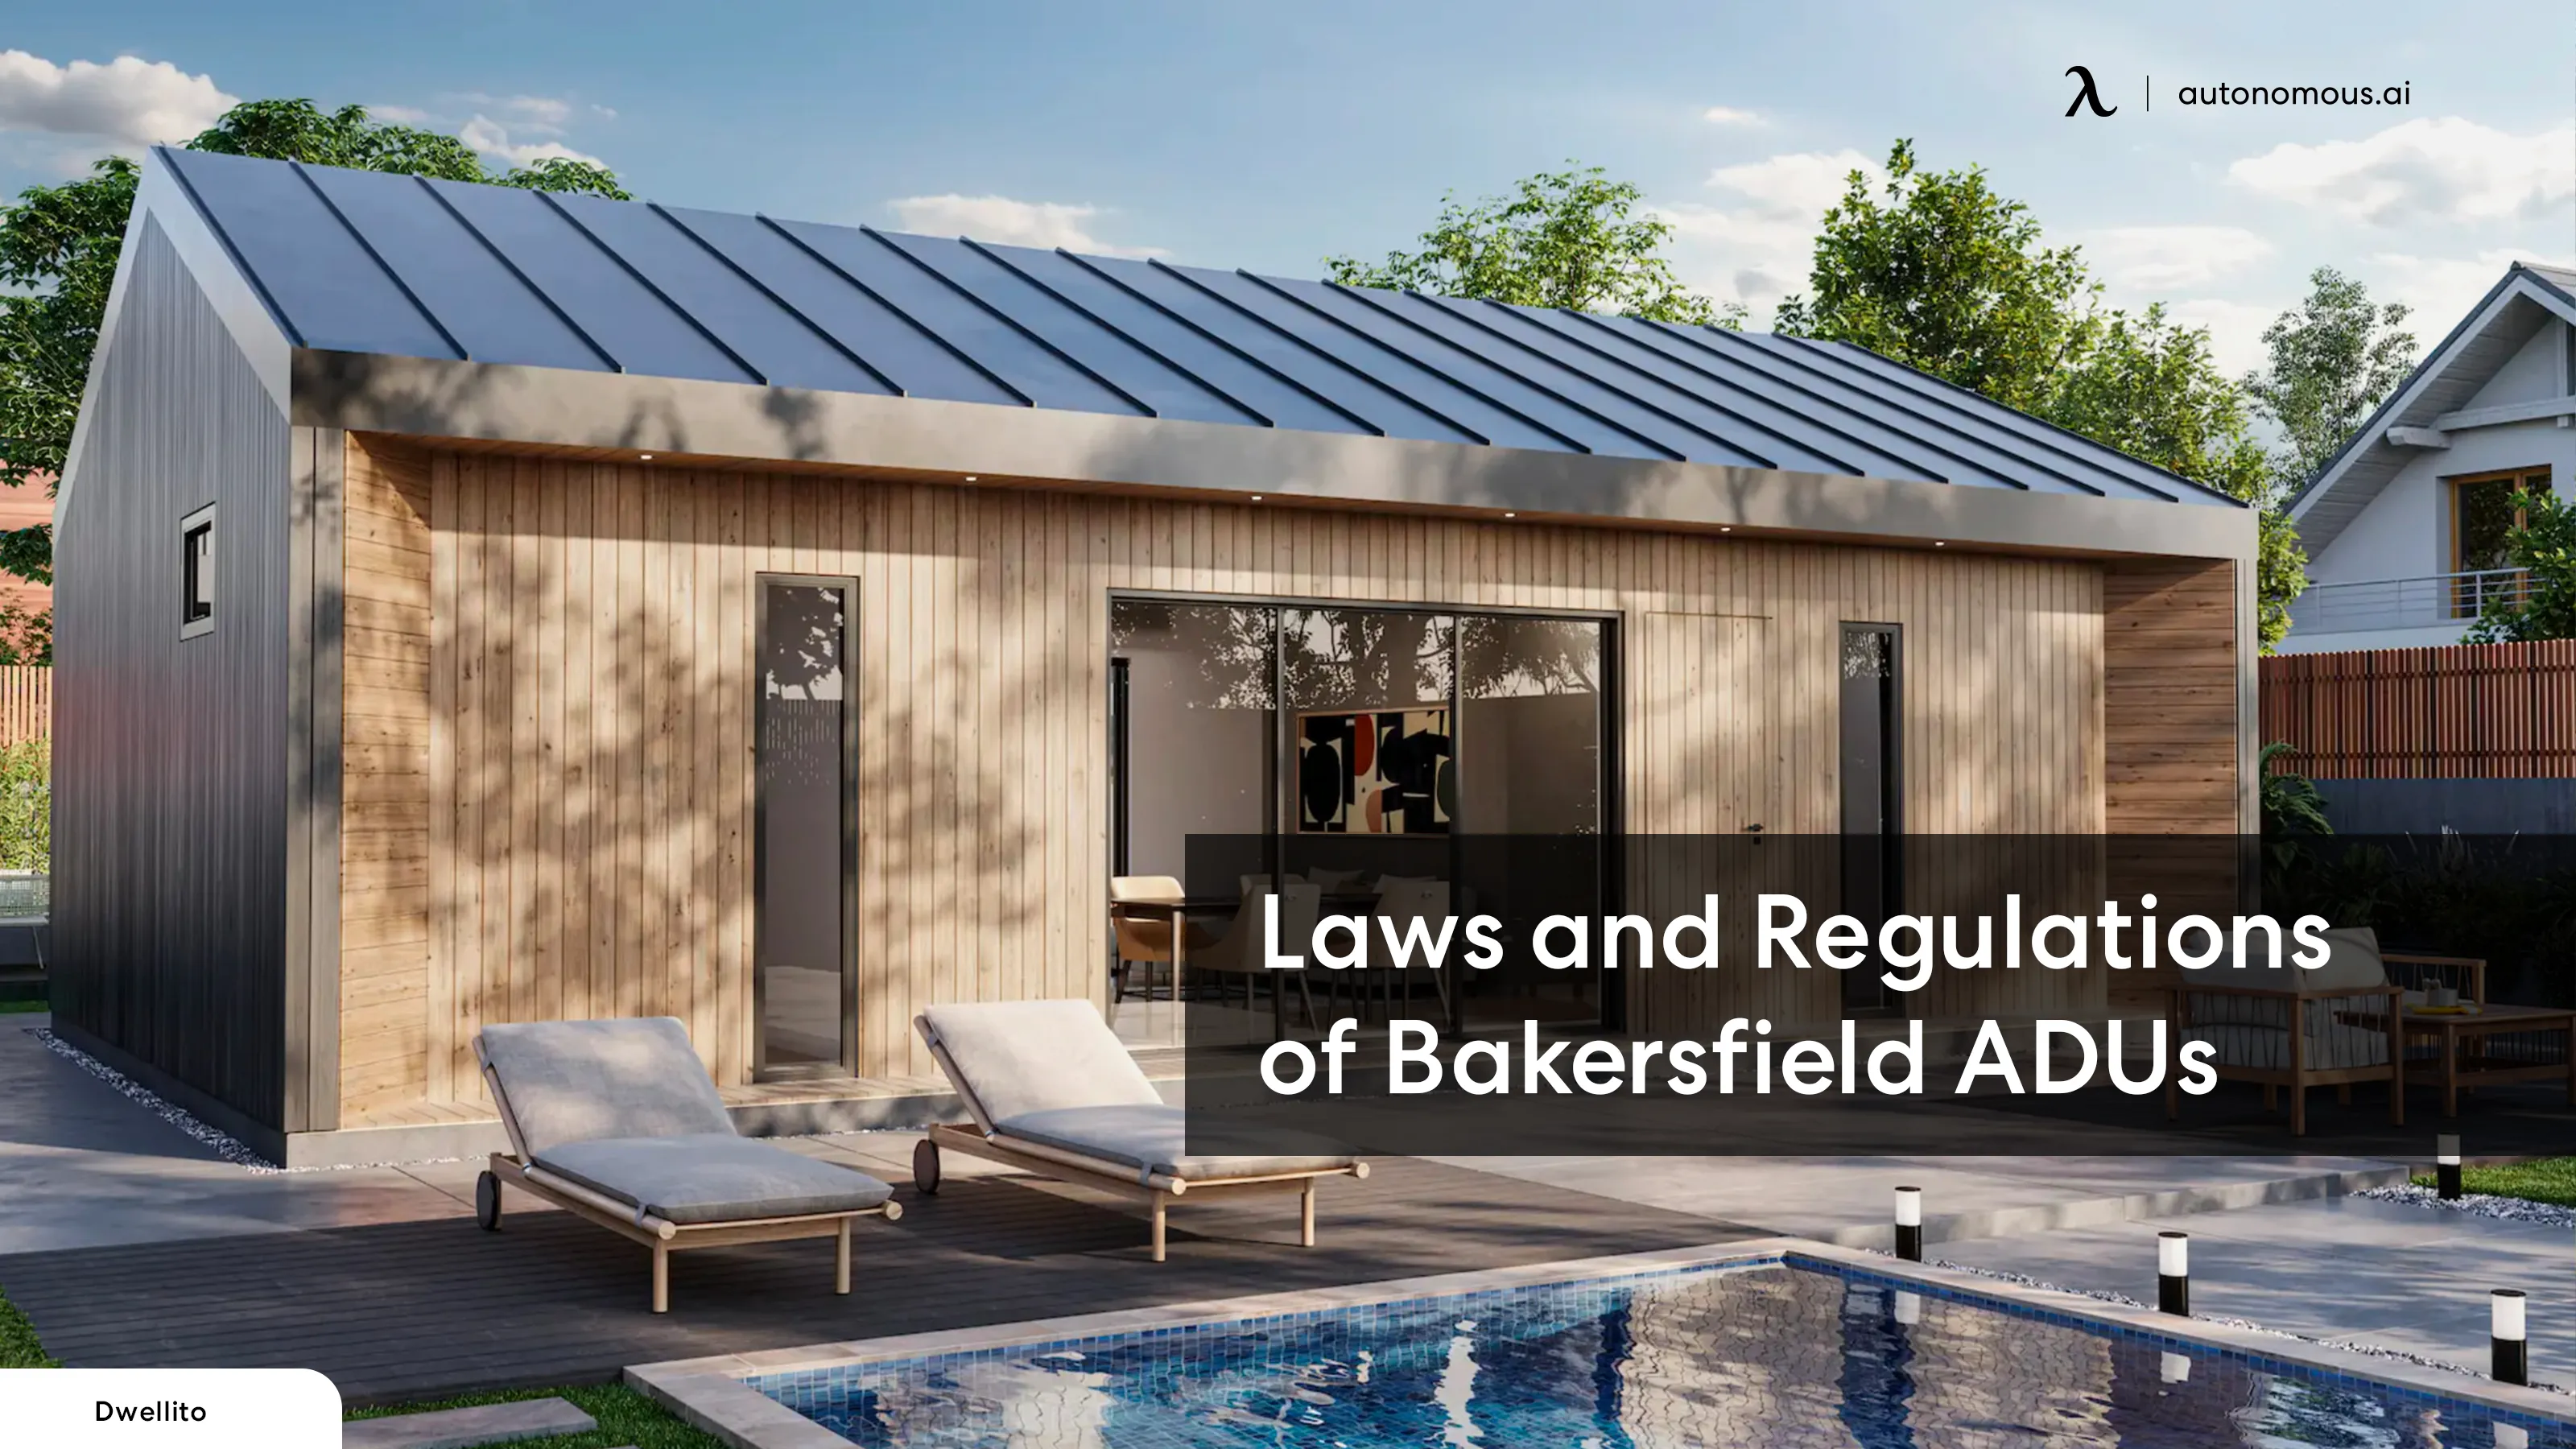 ADU Regulations in Bakersfield: Requirements, Permits, and More